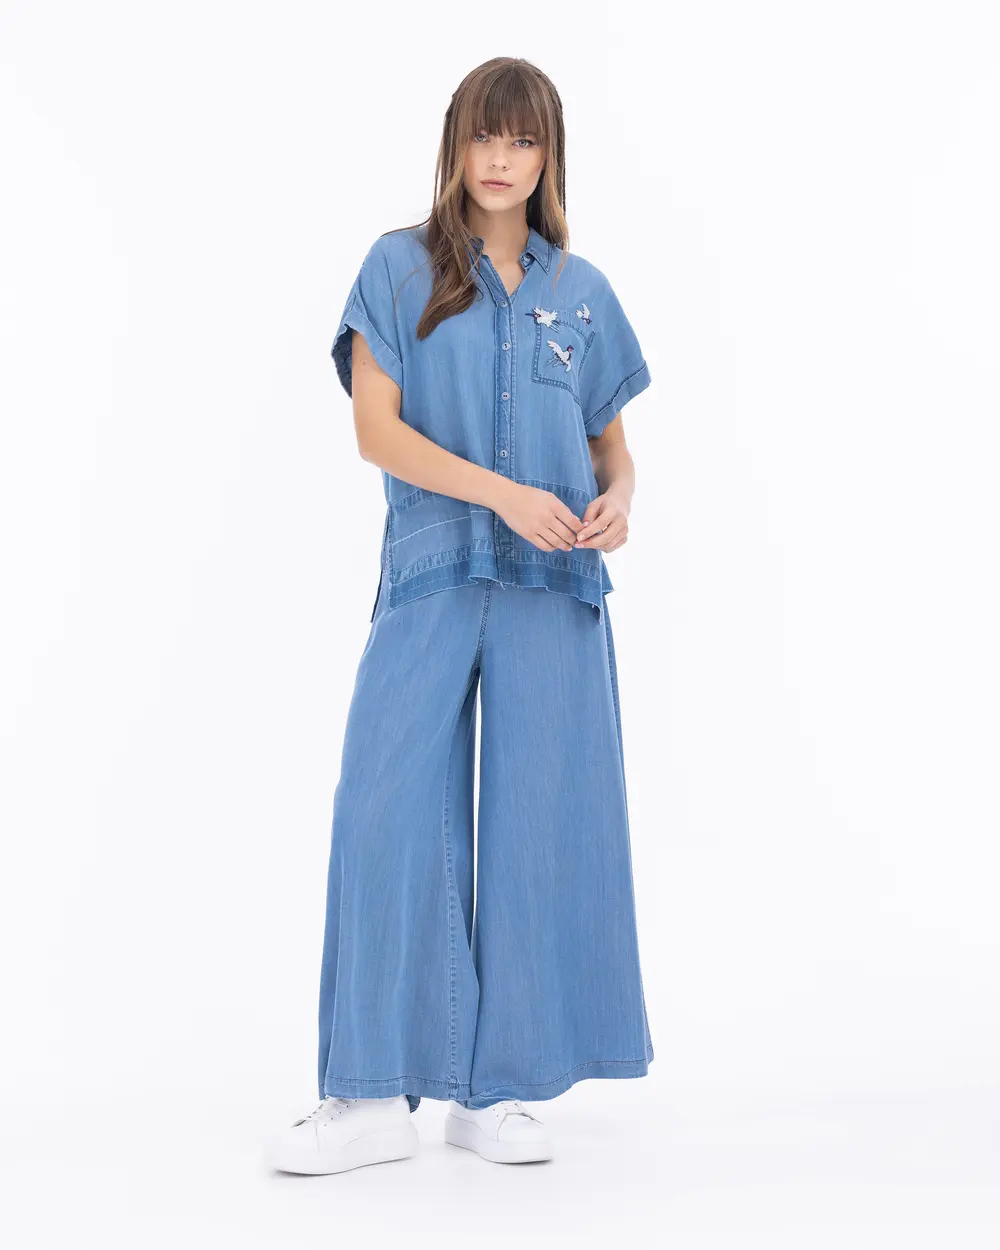 Embroidered Tencel Fabric Jean Shirt